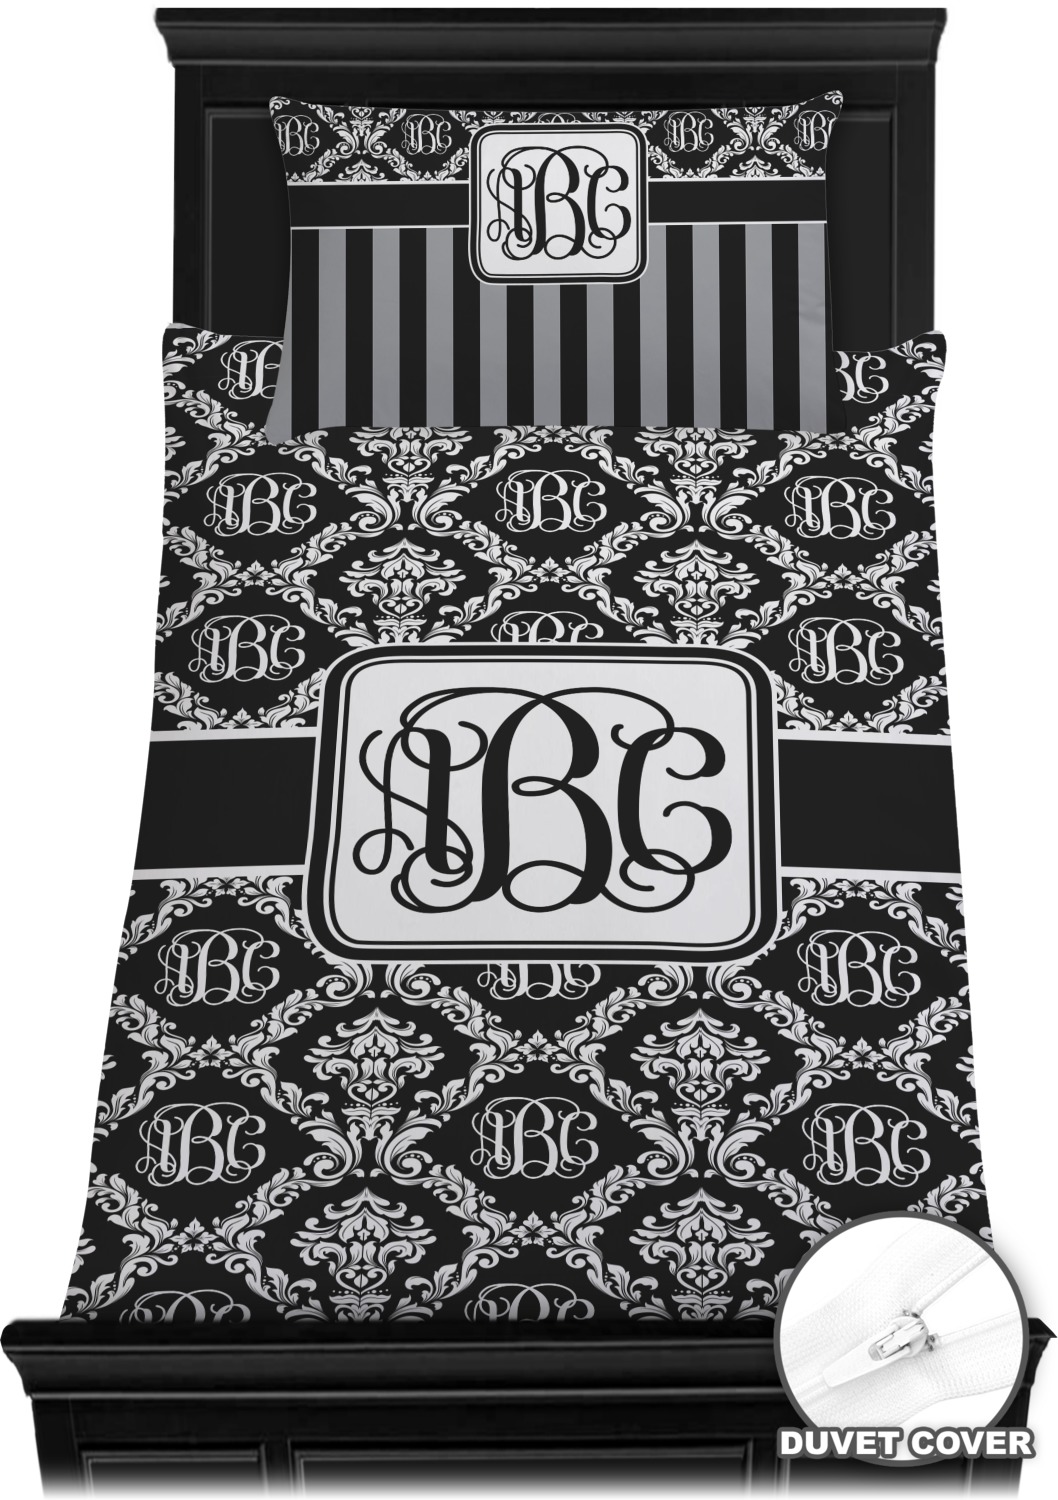 Monogrammed Damask Duvet Covers Personalized Youcustomizeit